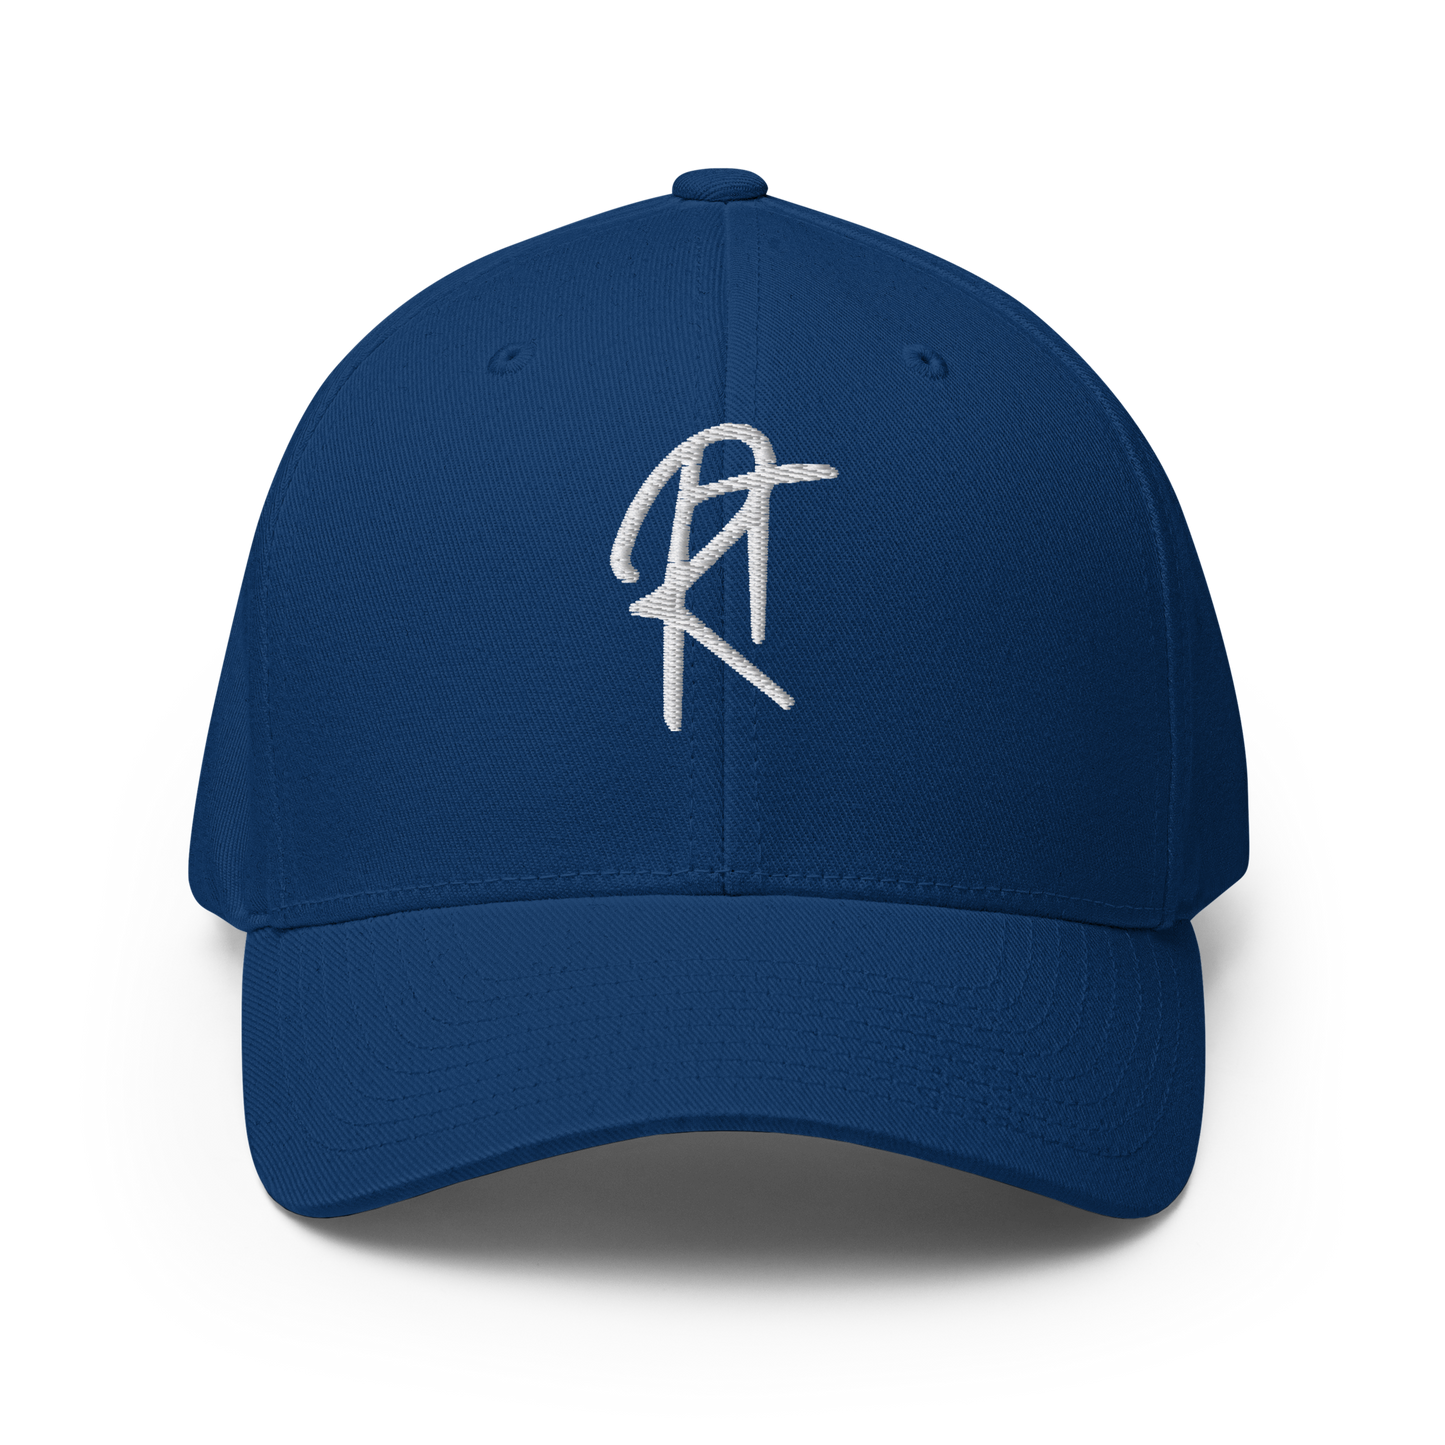 Royal Tay Closed-Back Structured Cap